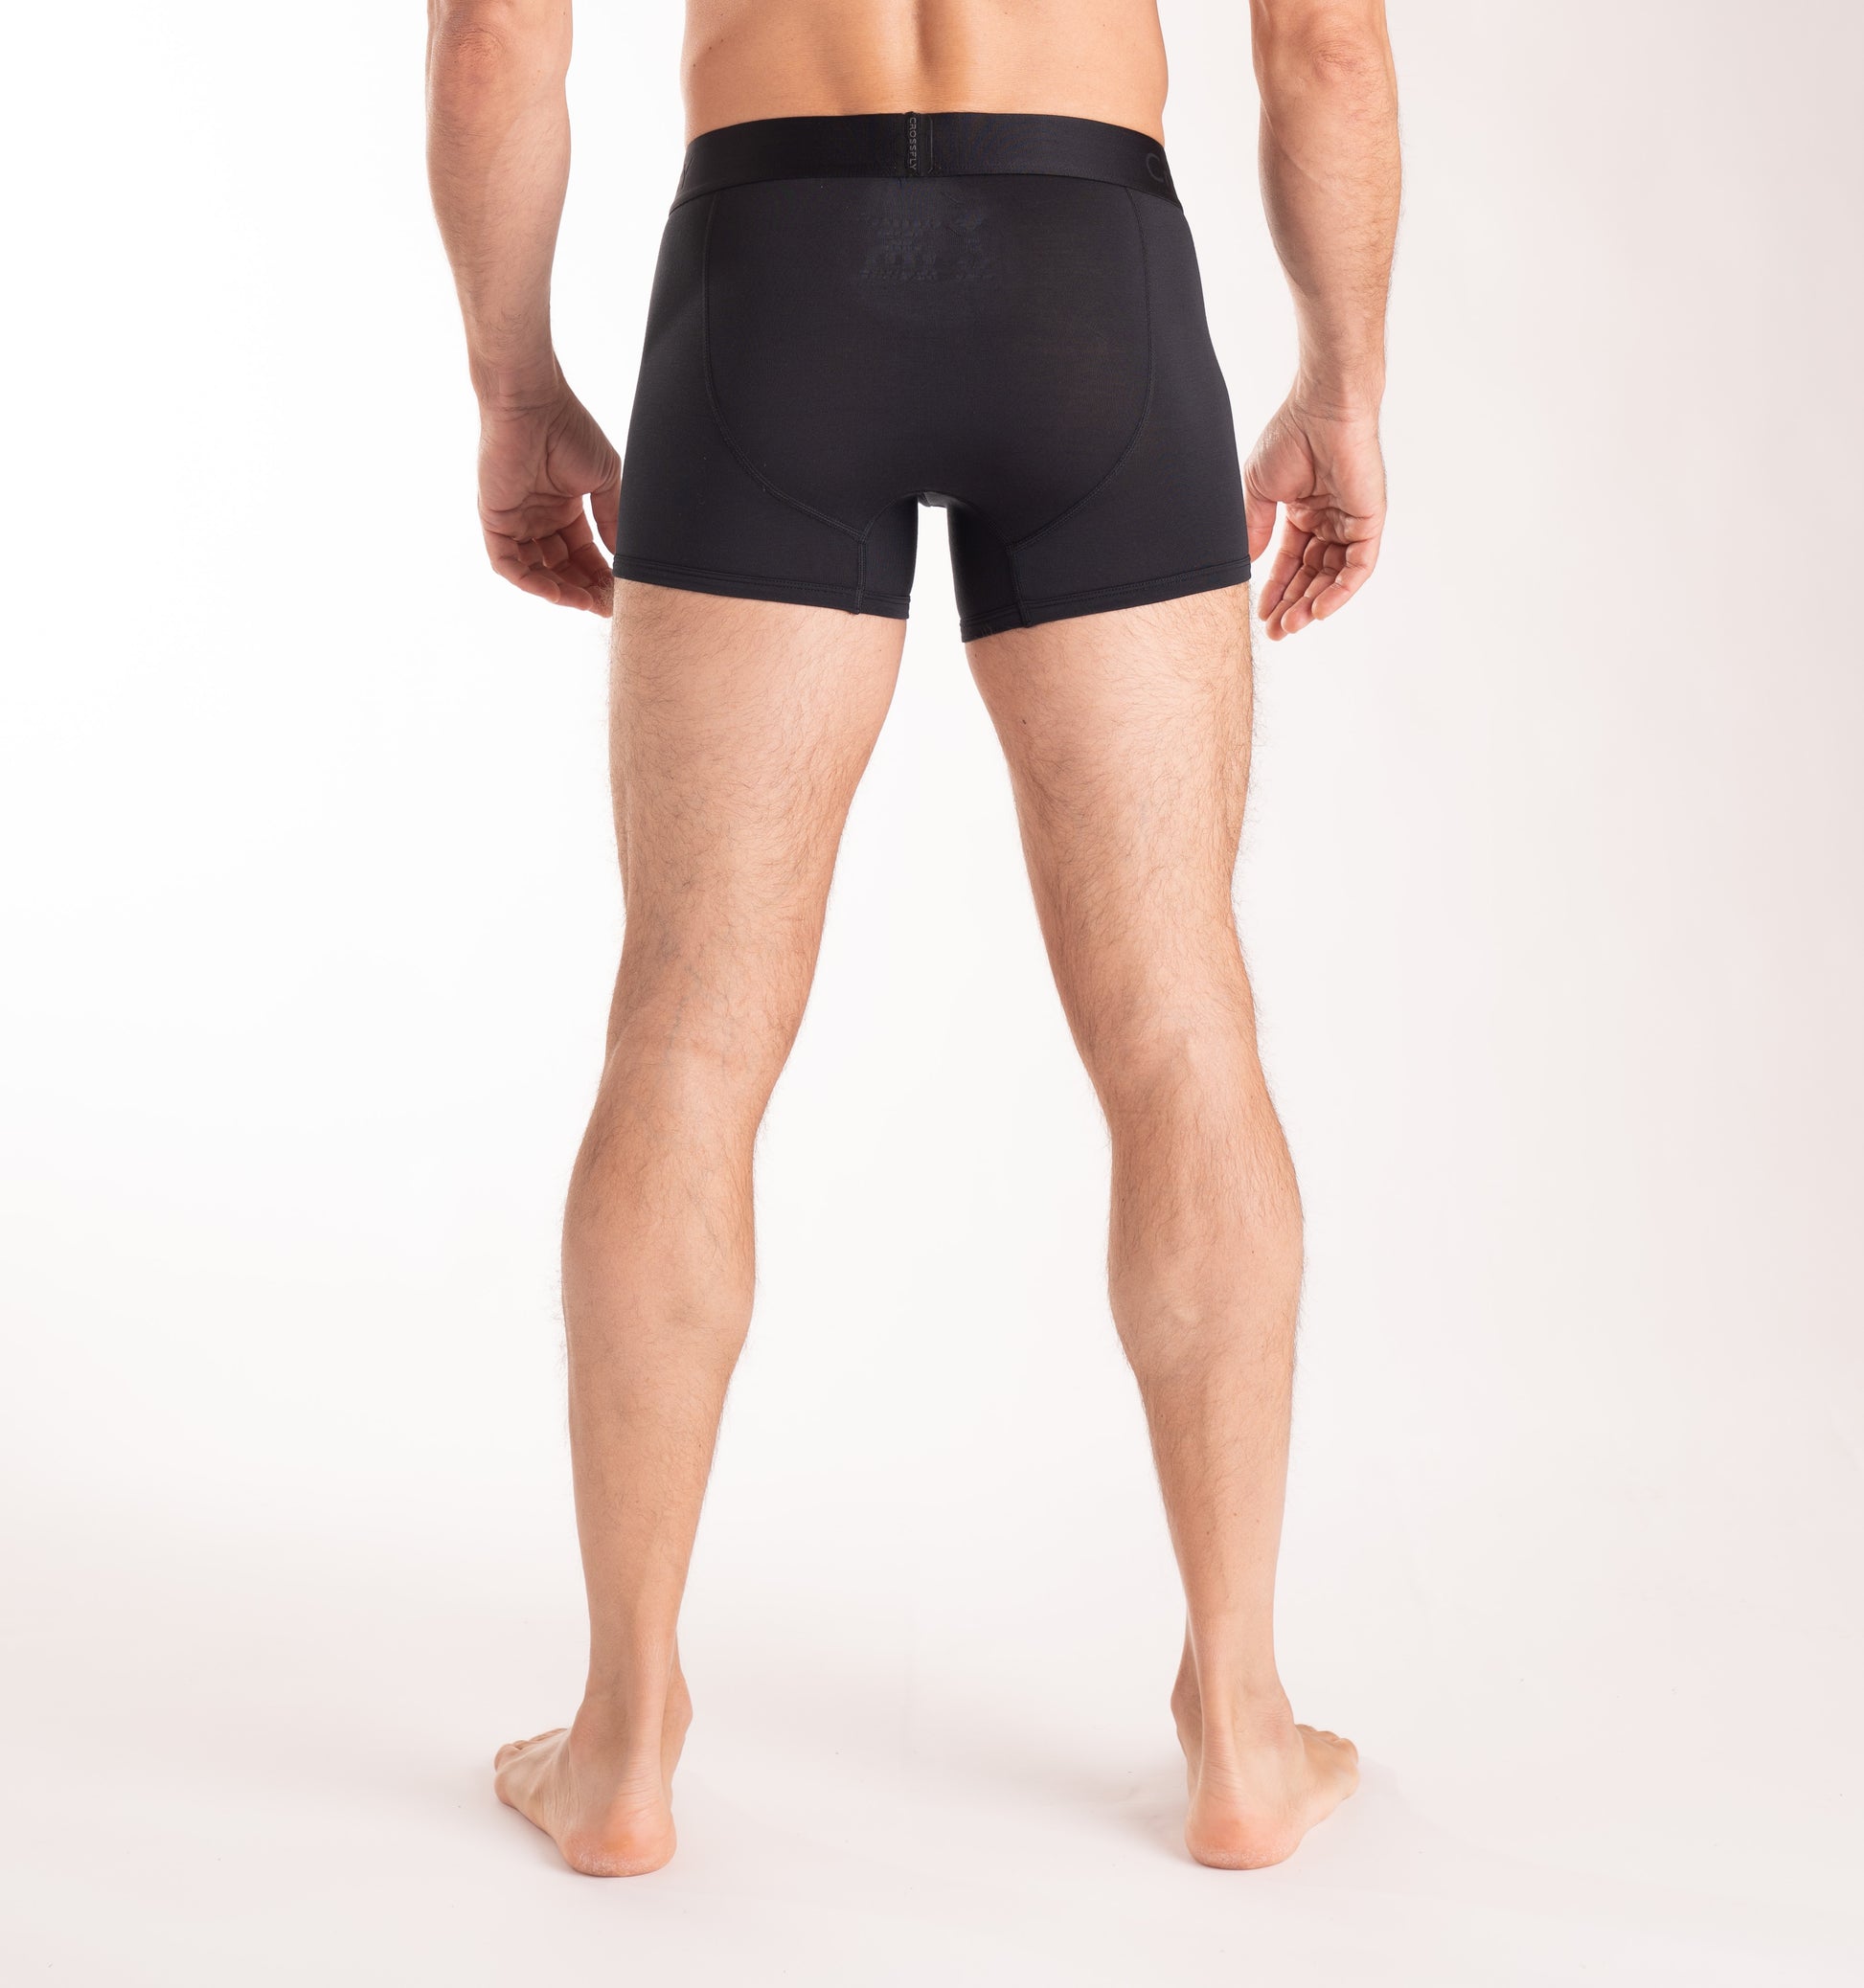 Crossfly men's IKON 3" black trunks from the Everyday series, featuring X-Fly and Coccoon internal pocket support.